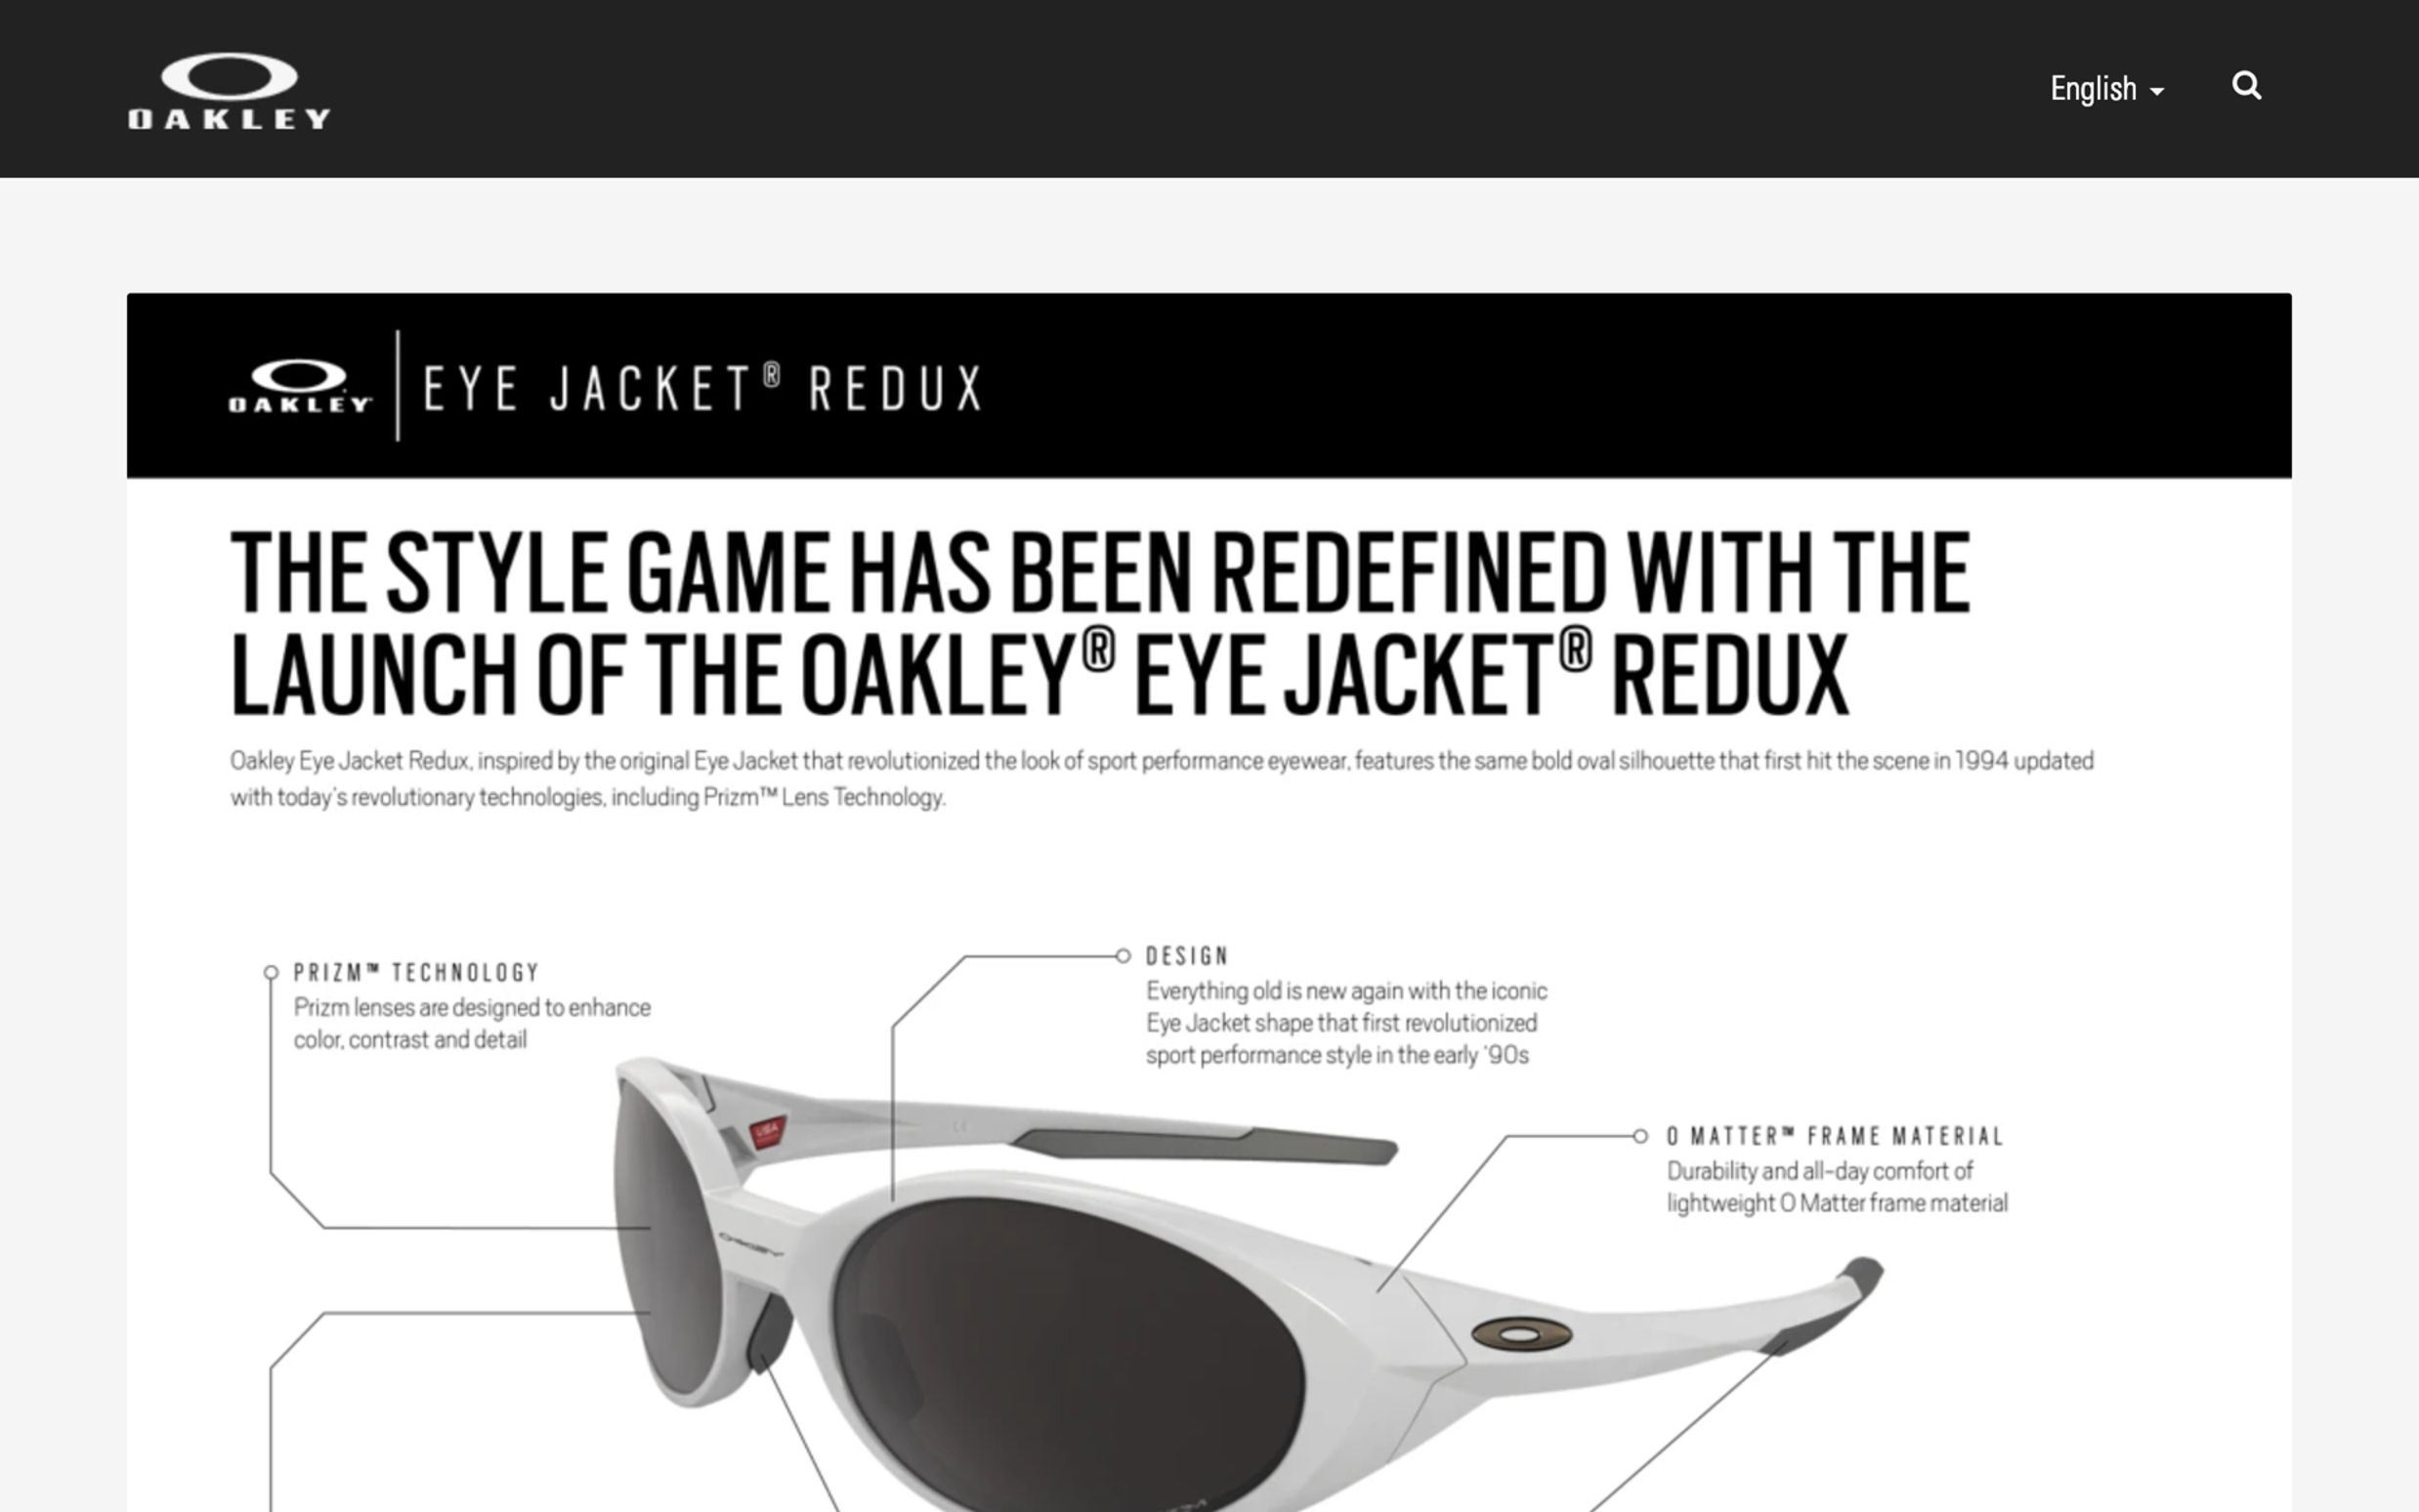 THE SPORTS PERFORMANCE STYLE GAME HAS BEEN REDEFINED WITH THE LAUNCH OF THE OAKLEY® EYE JACKET® REDUX